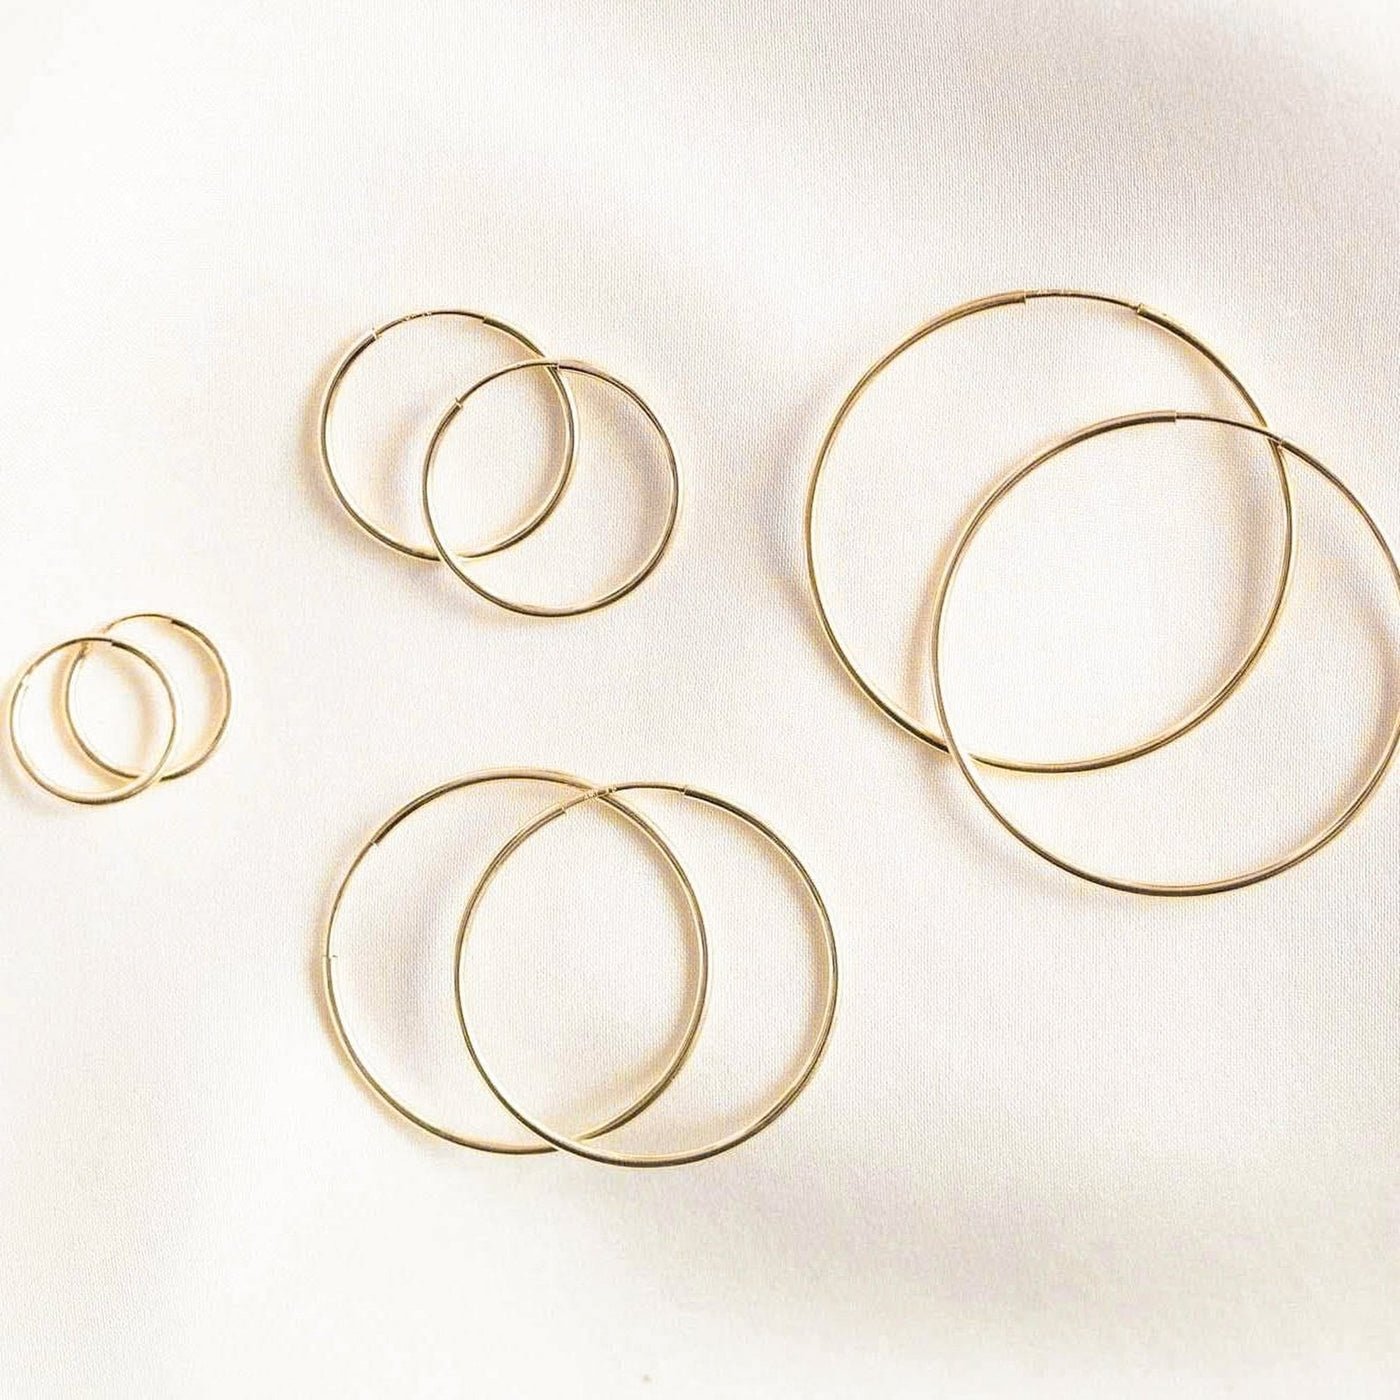 Small (14mm) Medium (20mm) Large (30mm) X-Large (38mm) 2X-Large (50mm) Thin Hoop Earrings by Simple & Dainty Jewelry